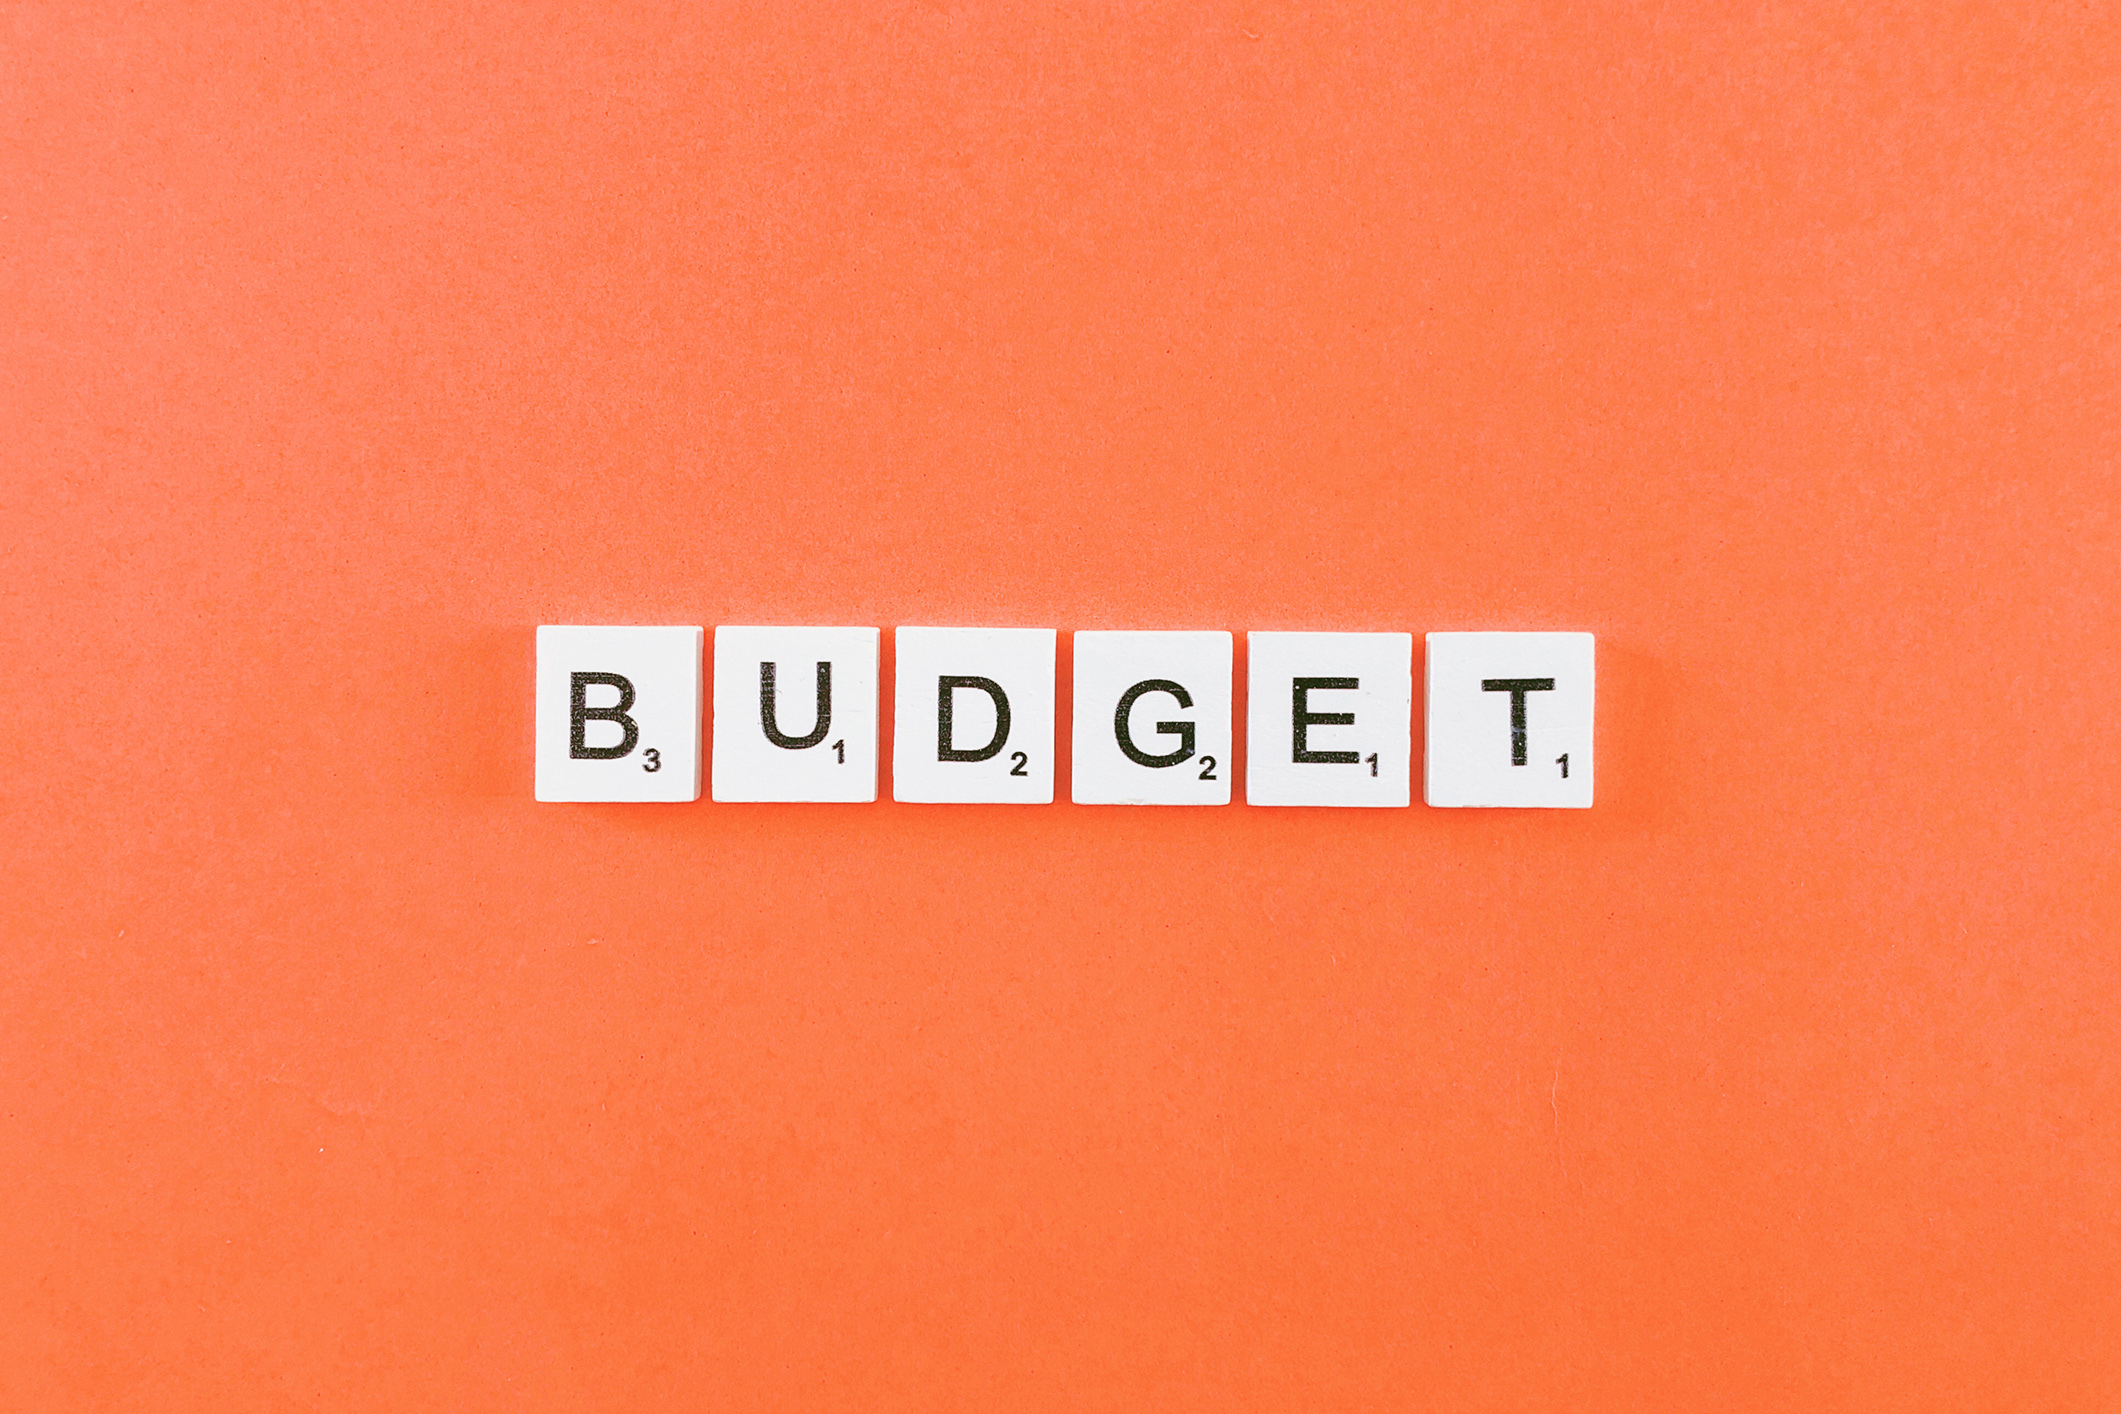 Budget Planner Calculator: Should You Rent or Buy a Home?